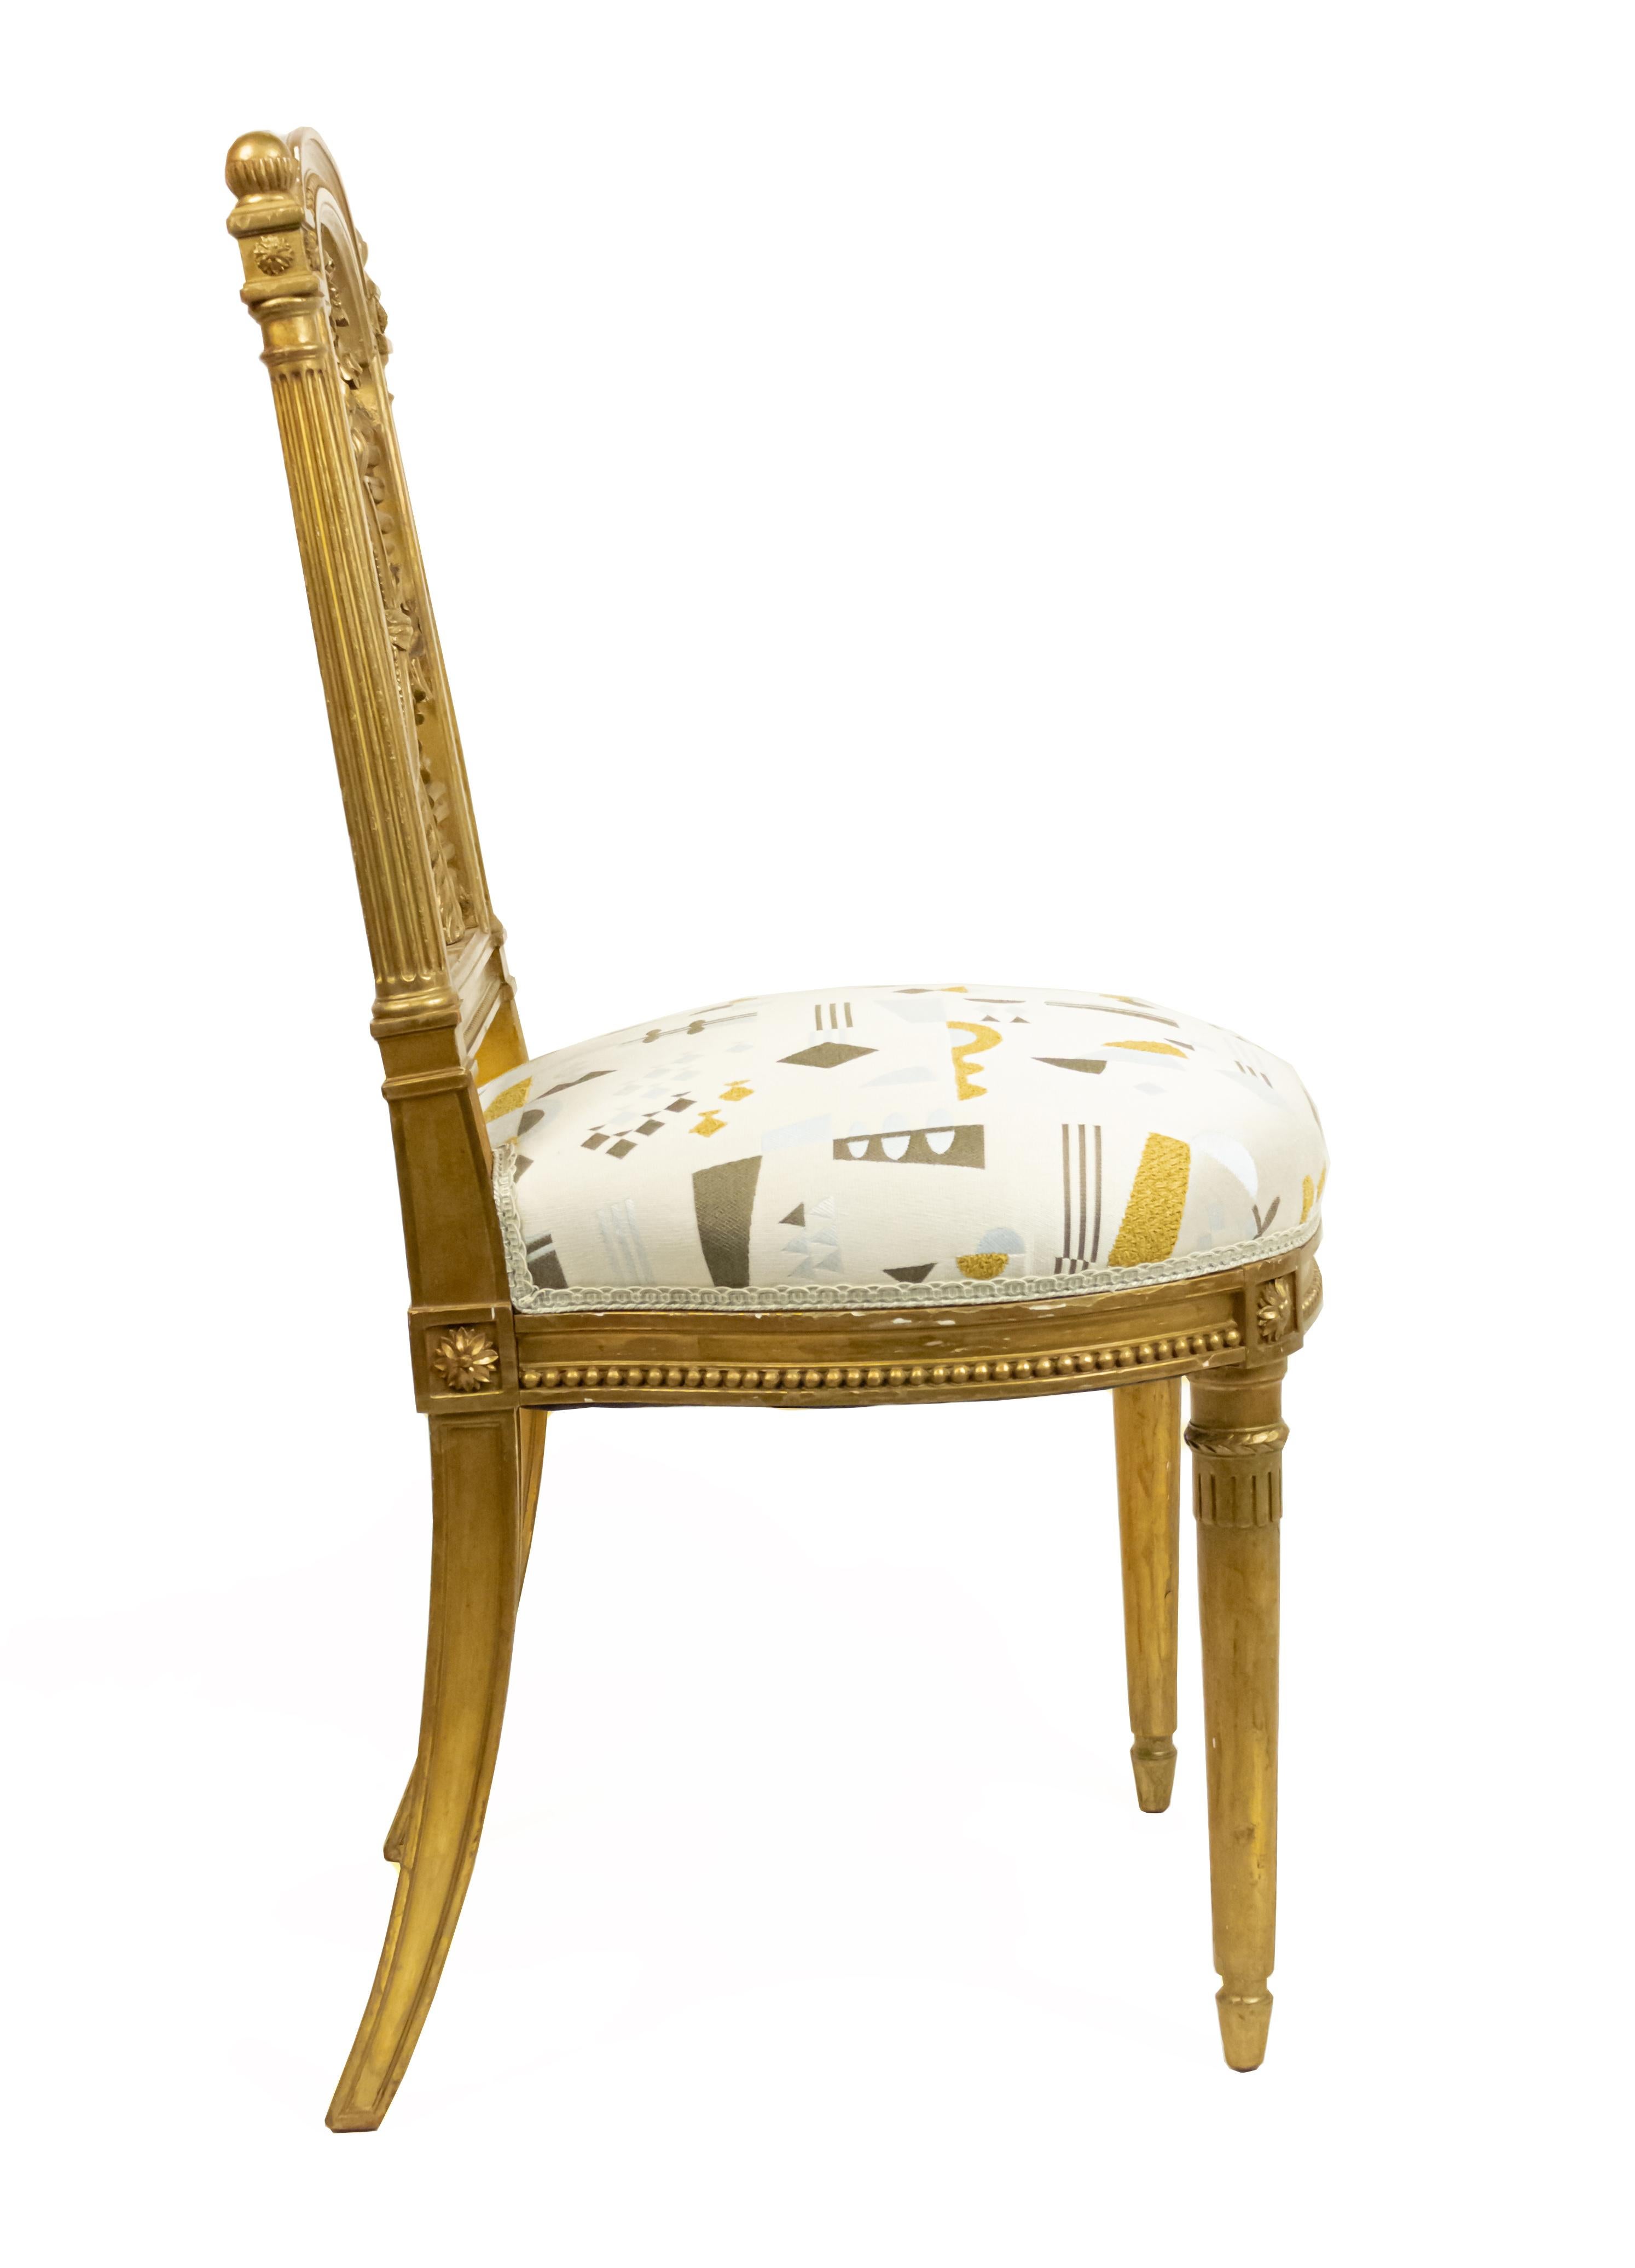 Pair of French Louis XVI style 19th century gilt side chairs with carved back designed with wreath and arrow and initials MA (Marie Antoinette) with contemporary off-white multicolored geometric upholstery.